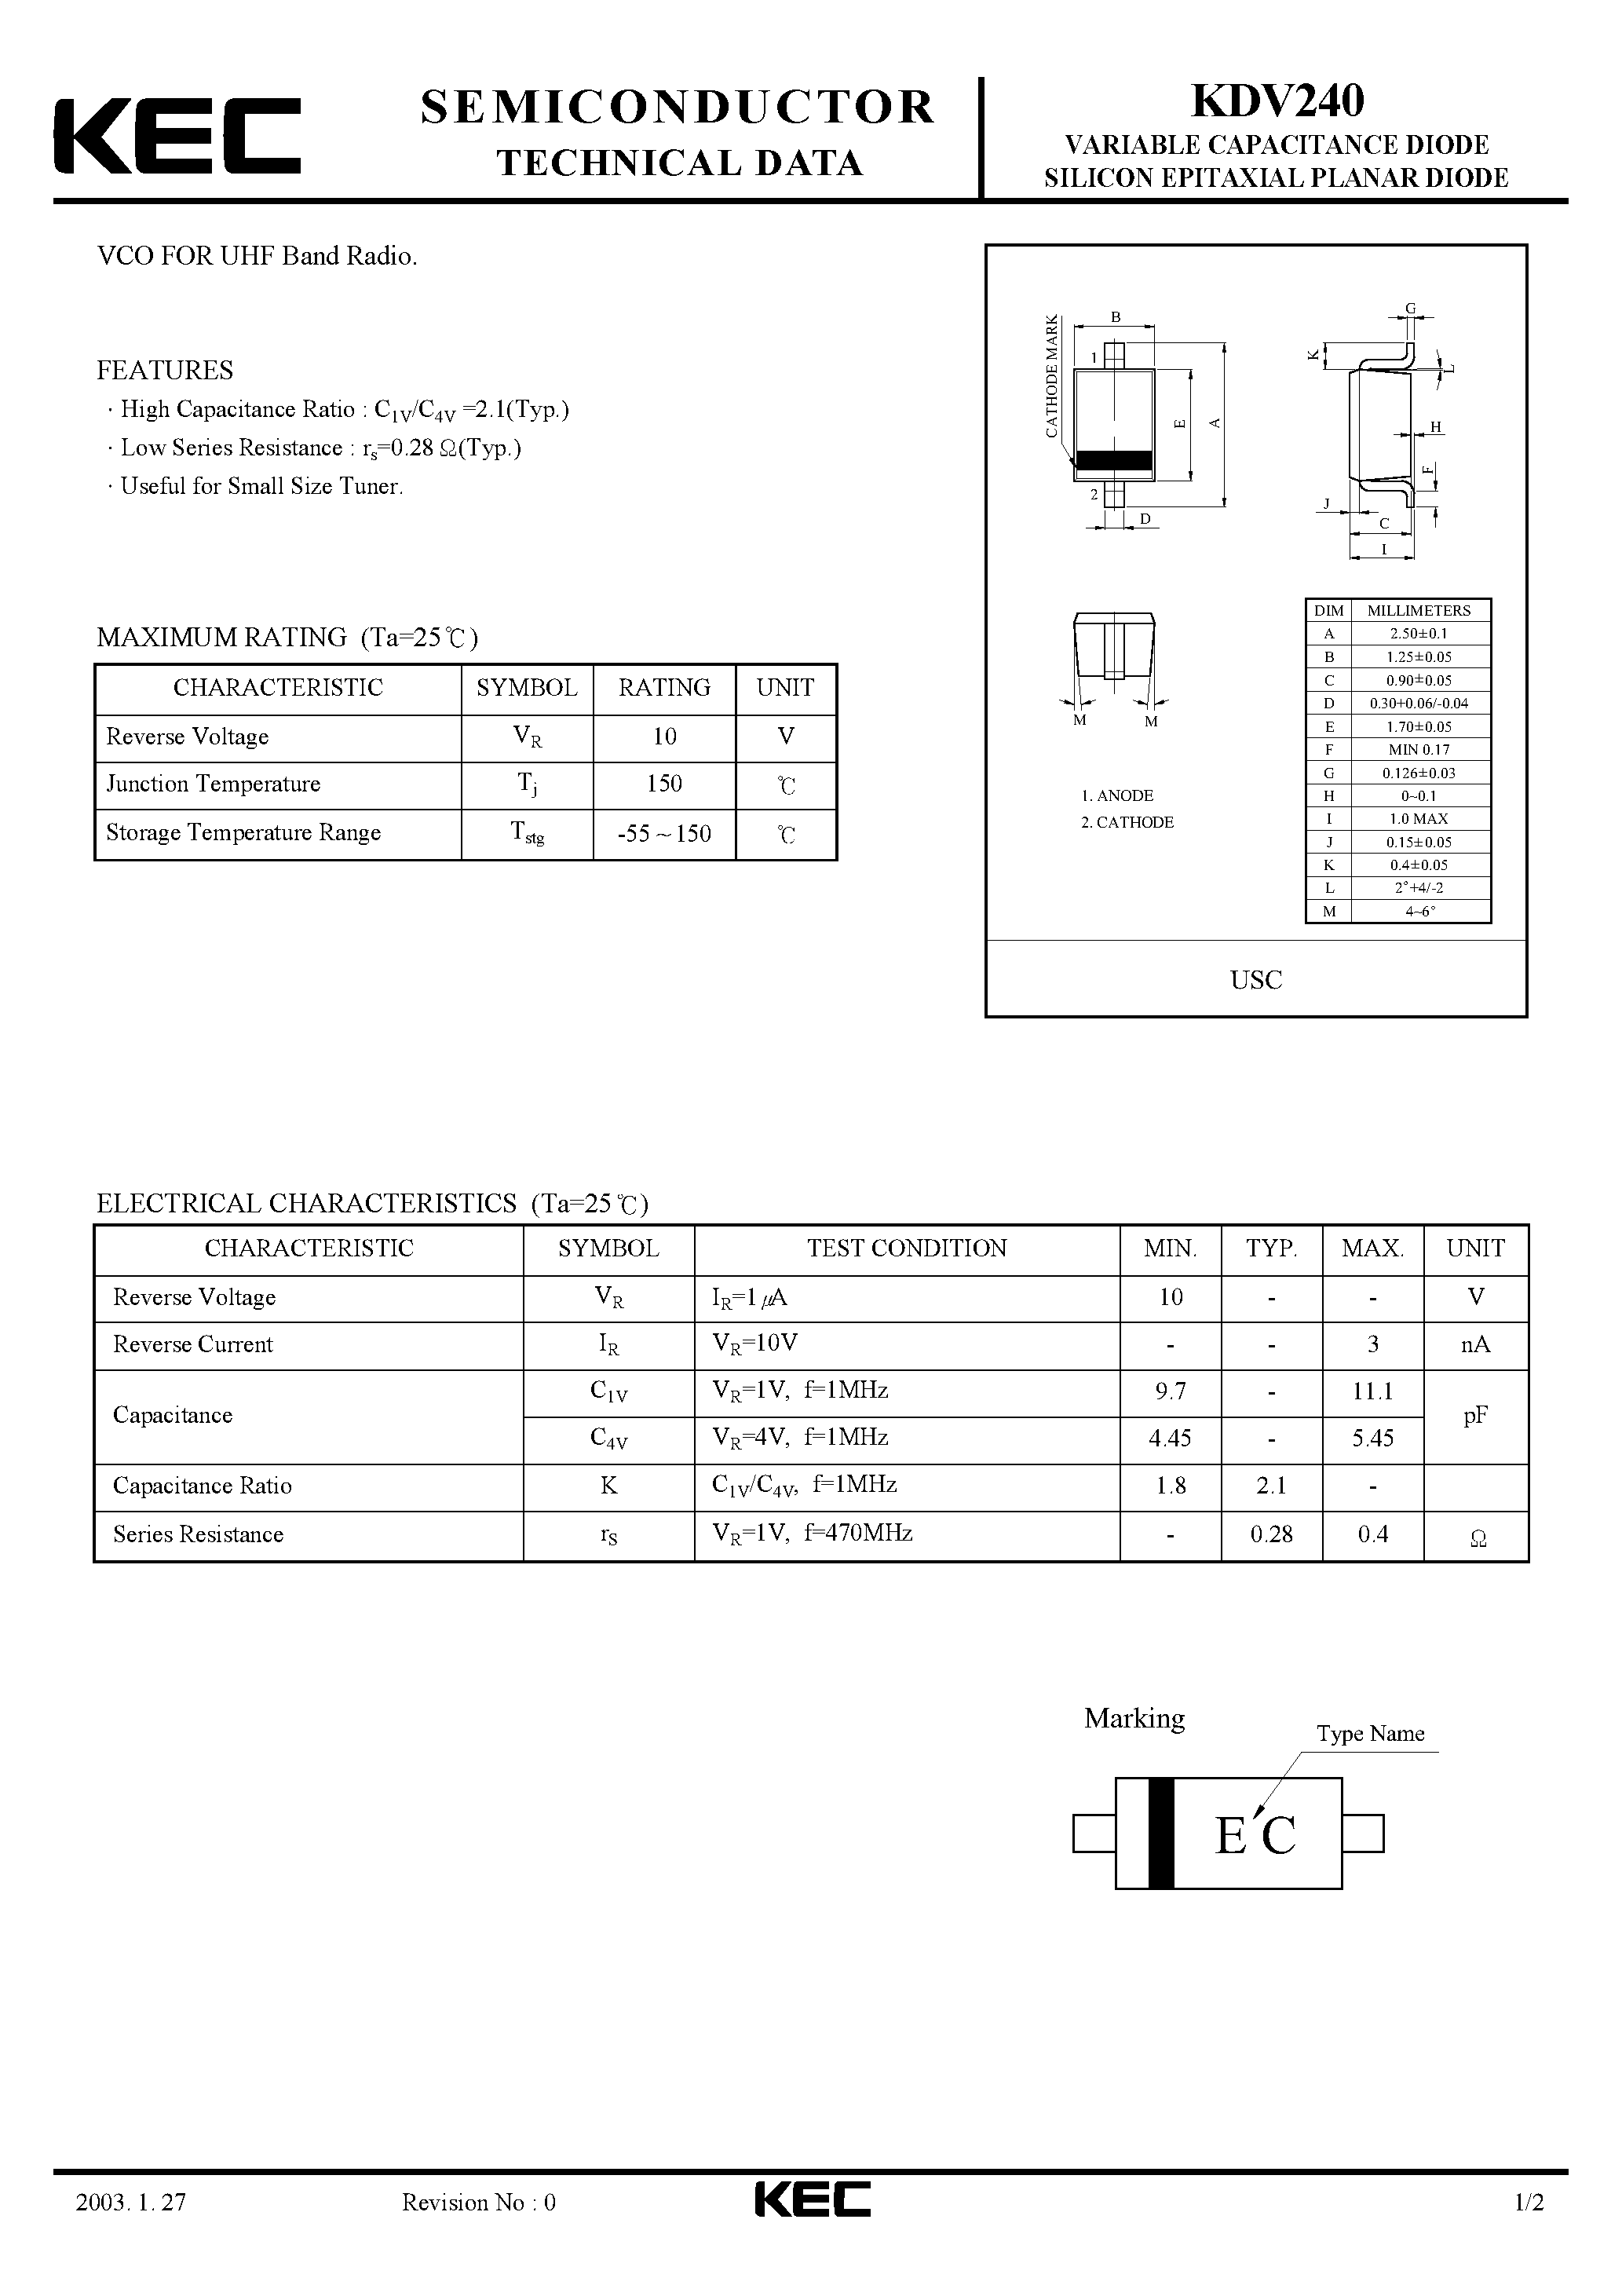 Datasheet KDV240 - VARIABLE CAPACITANCE DIODE SILICON EPITAXIAL PLANAR DIODE(VCO FOR UHF RADIO) page 1